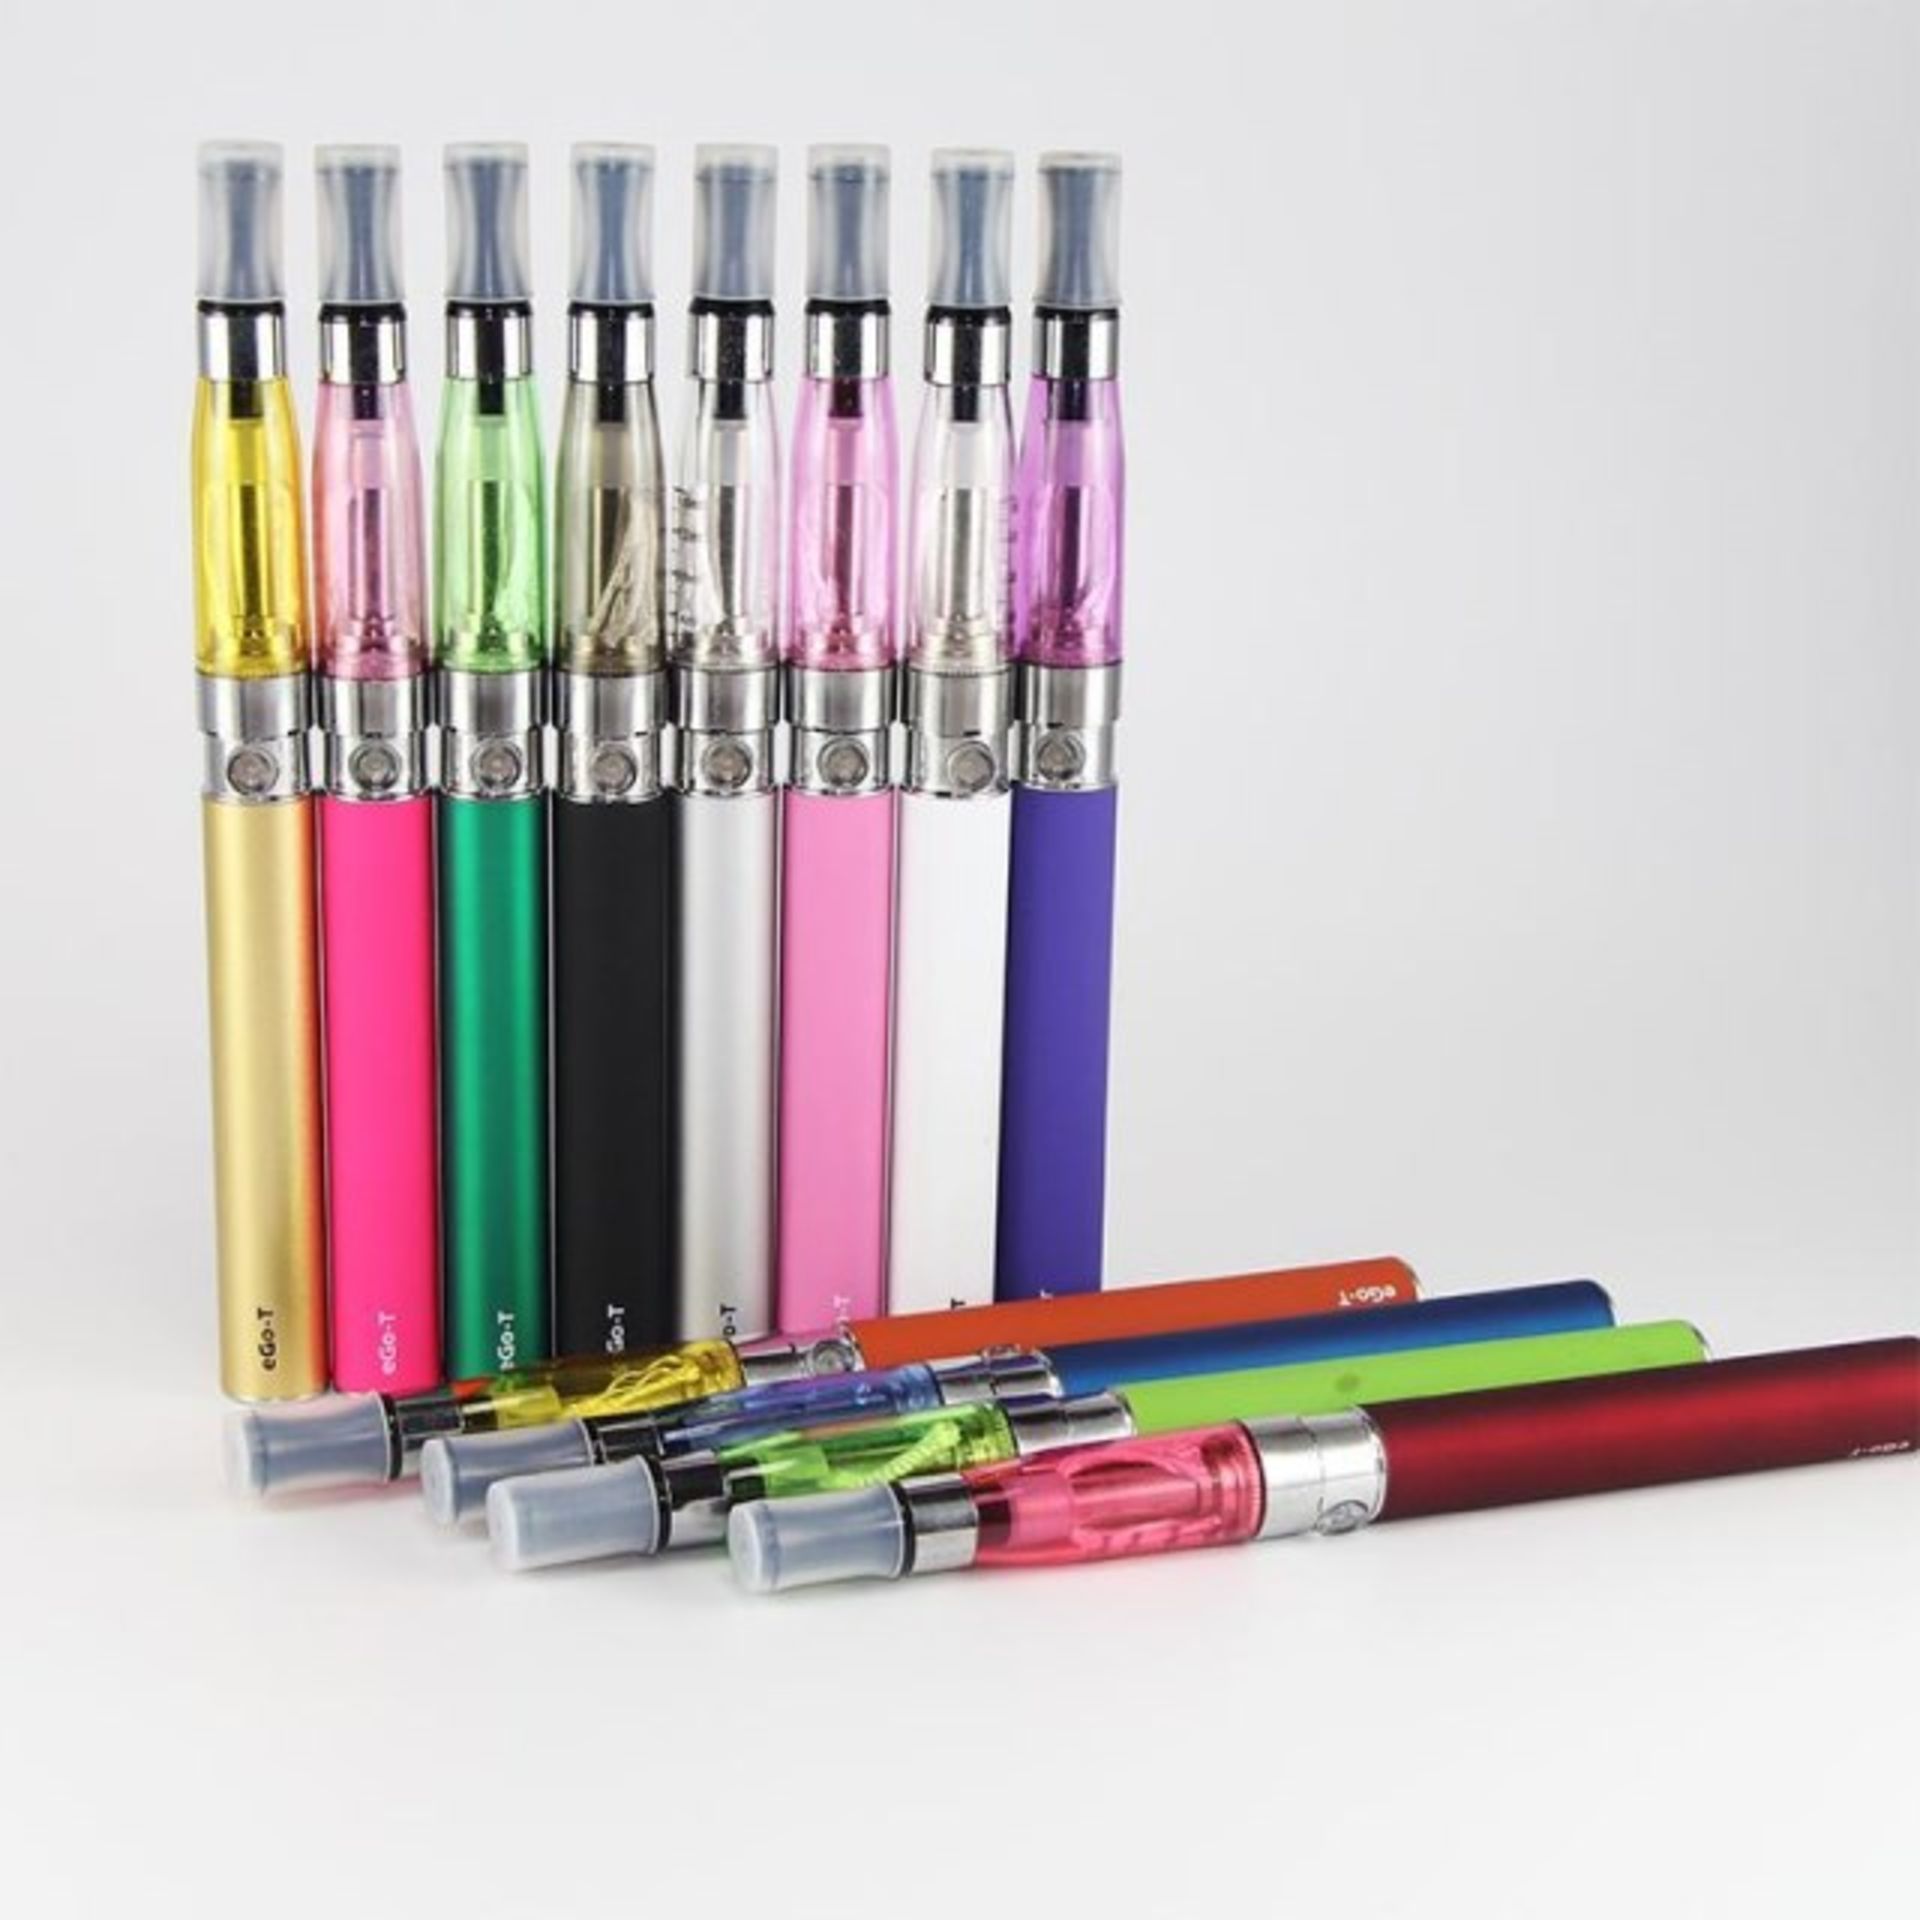 Brand New Electronic Cigarette Kit With Battery And USB Charger (Colours May Vary)